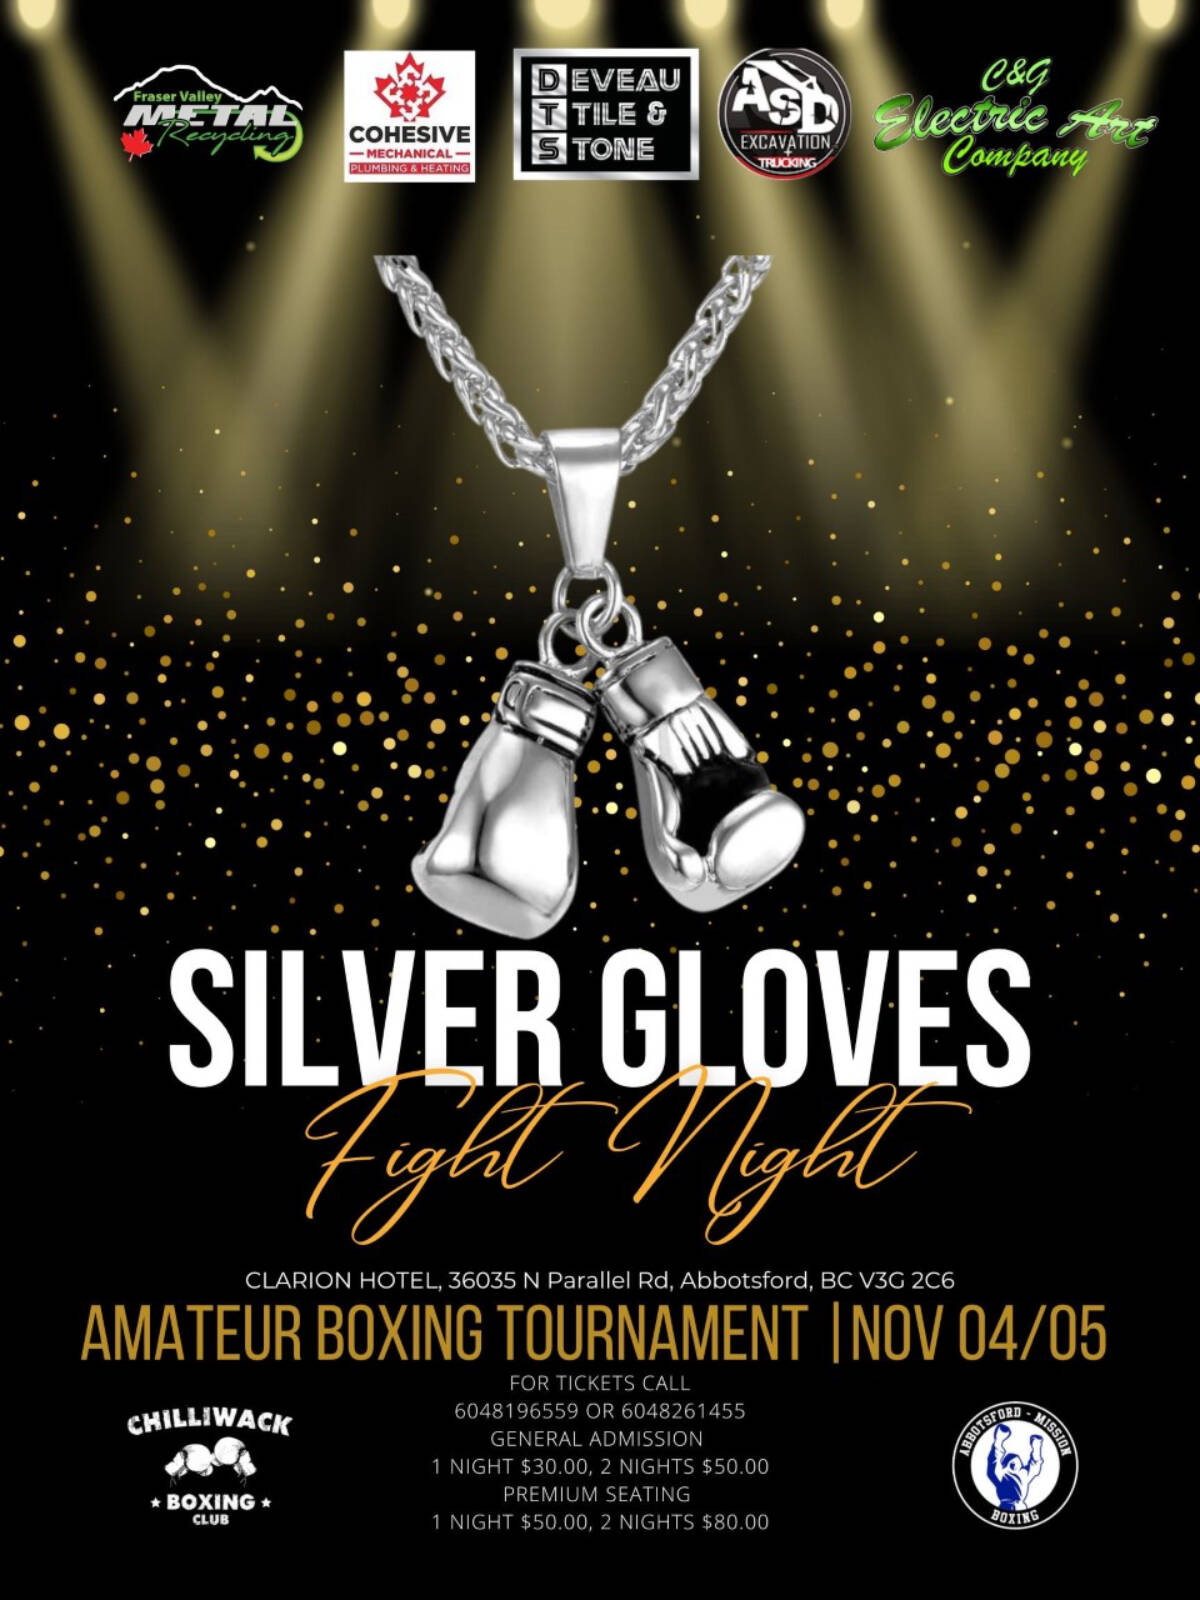 Silver Gloves boxing event returning to Abbotsfords Clarion Hotel and Conference Centre